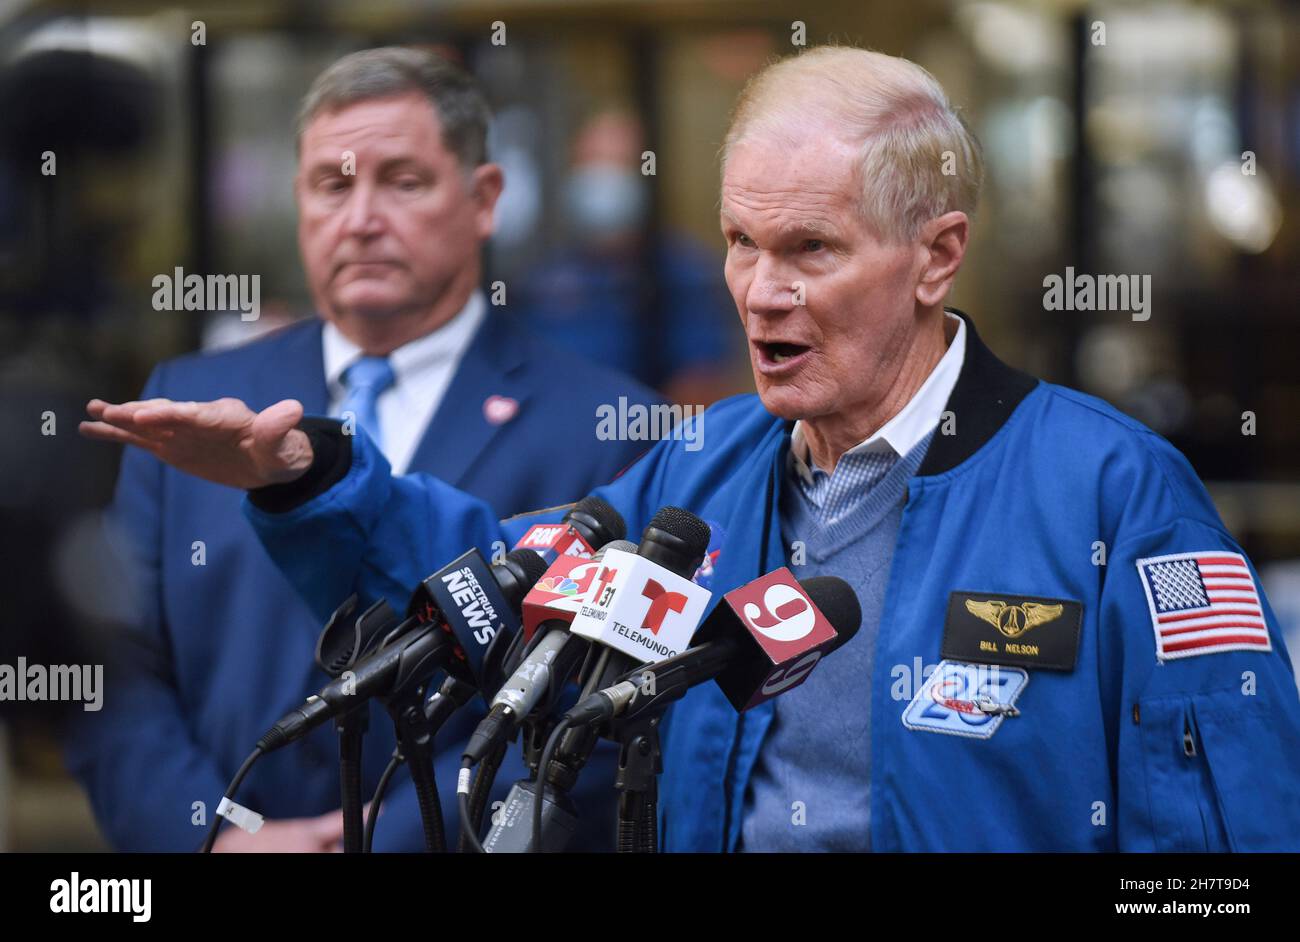 NASA Administrator Bill Nelson (R) delivers his speech while Orlando Aviation Authority CEO Phil Brown (L) attentively listens during a press conference of the implementation of a NASA-developed flight scheduling technology to all airports across the country in 2023.The Airspace Technology Demonstration 2 (ATD-2) system was transferred to the Federal Aviation Administration (FAA) in September. This technology will allow planes to roll directly to the runway for takeoff to avoid excessive taxi-out time and hold time thereby reducing fuel use, emissions, and passenger delays. Stock Photo